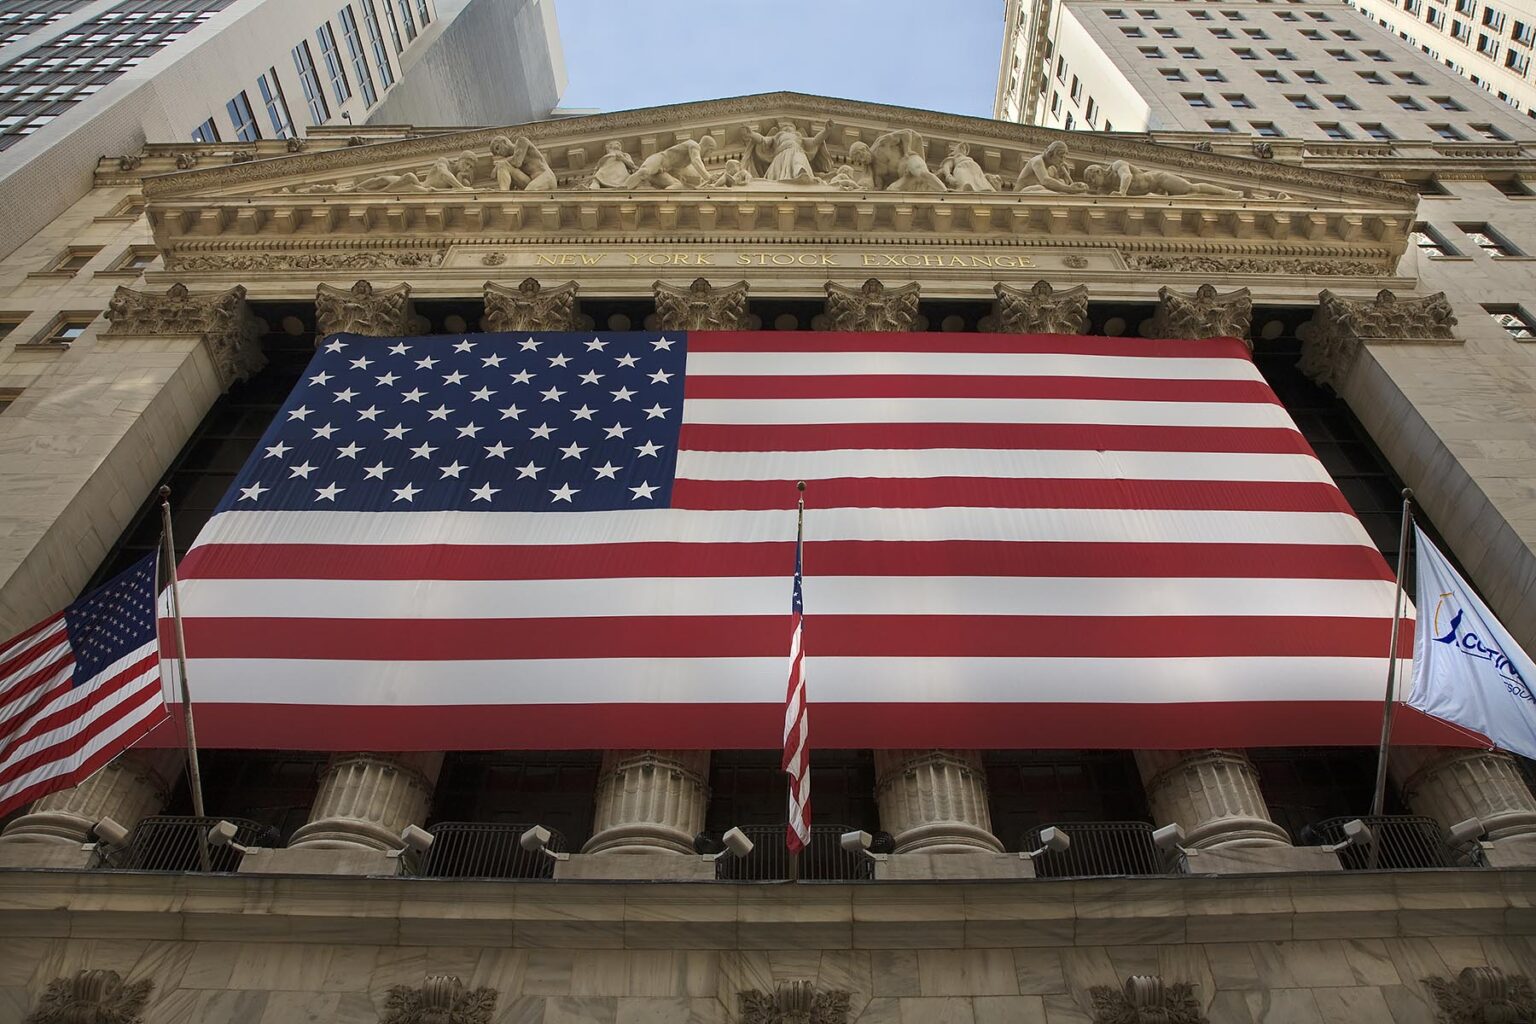 Large AMERICAN FLAG in front of the NYSE - NEW YORK CITY